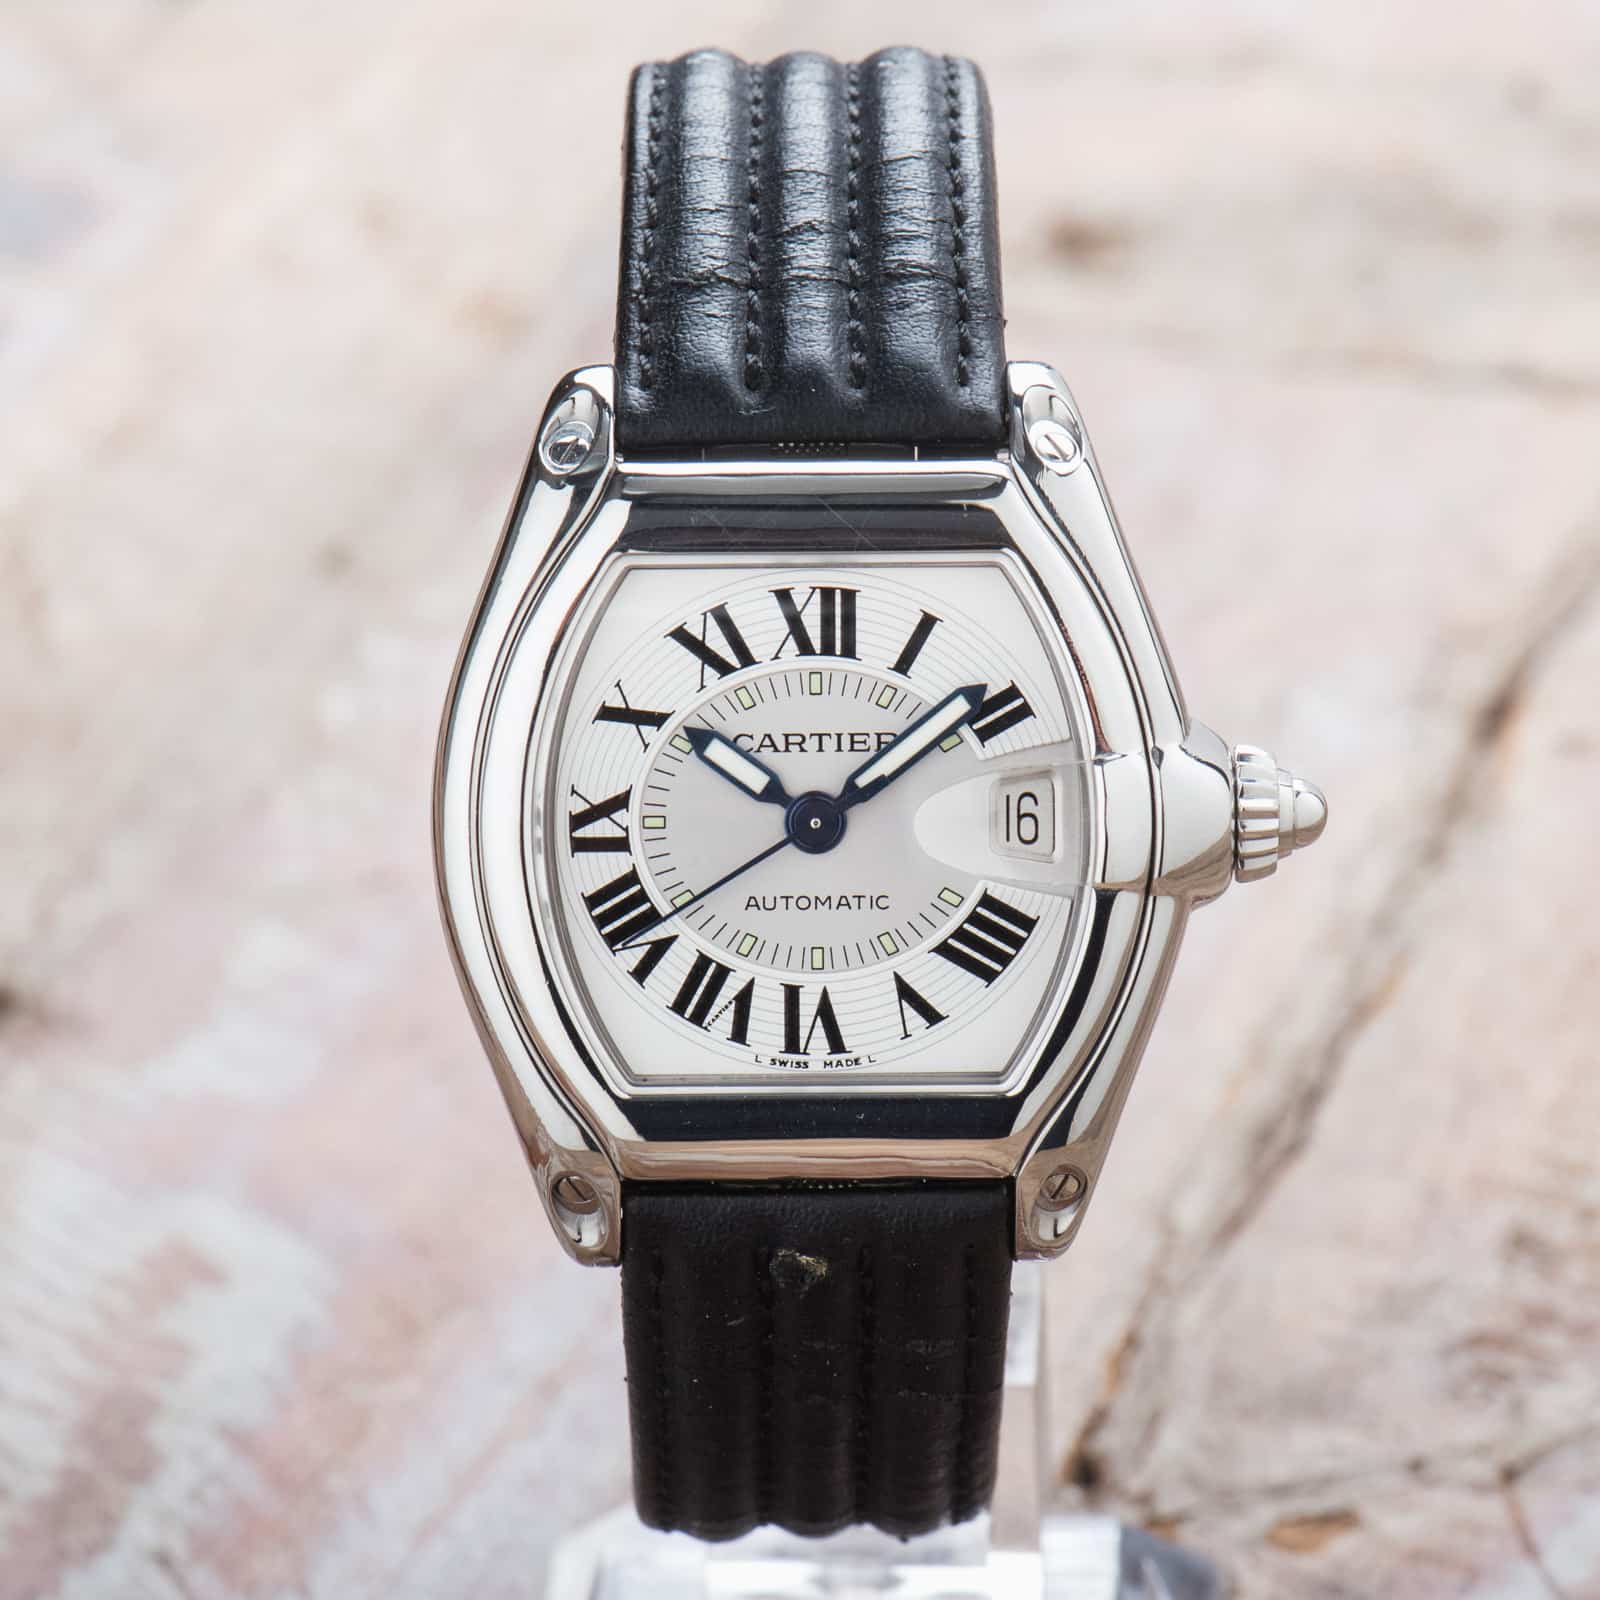 Cartier Roadster Automatic Black Leather Date Ref. 2510